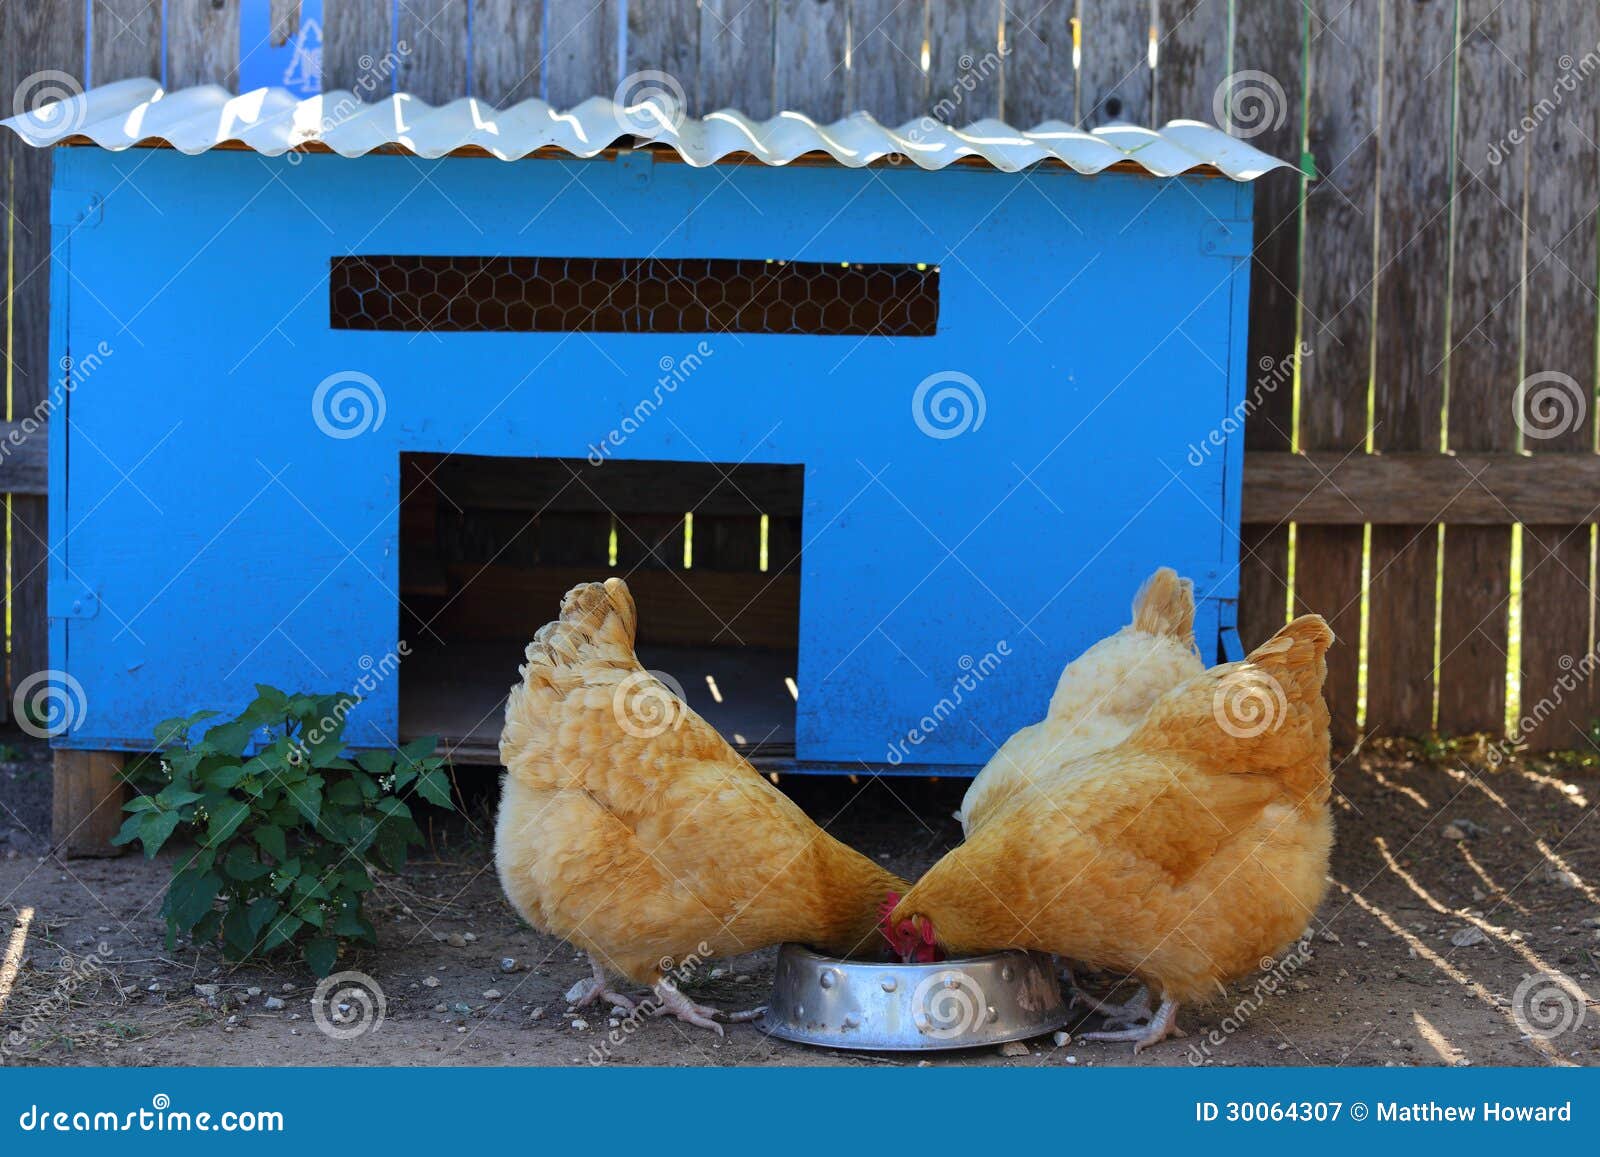 Chickens And Coop Royalty Free Stock Photography - Image: 30064307